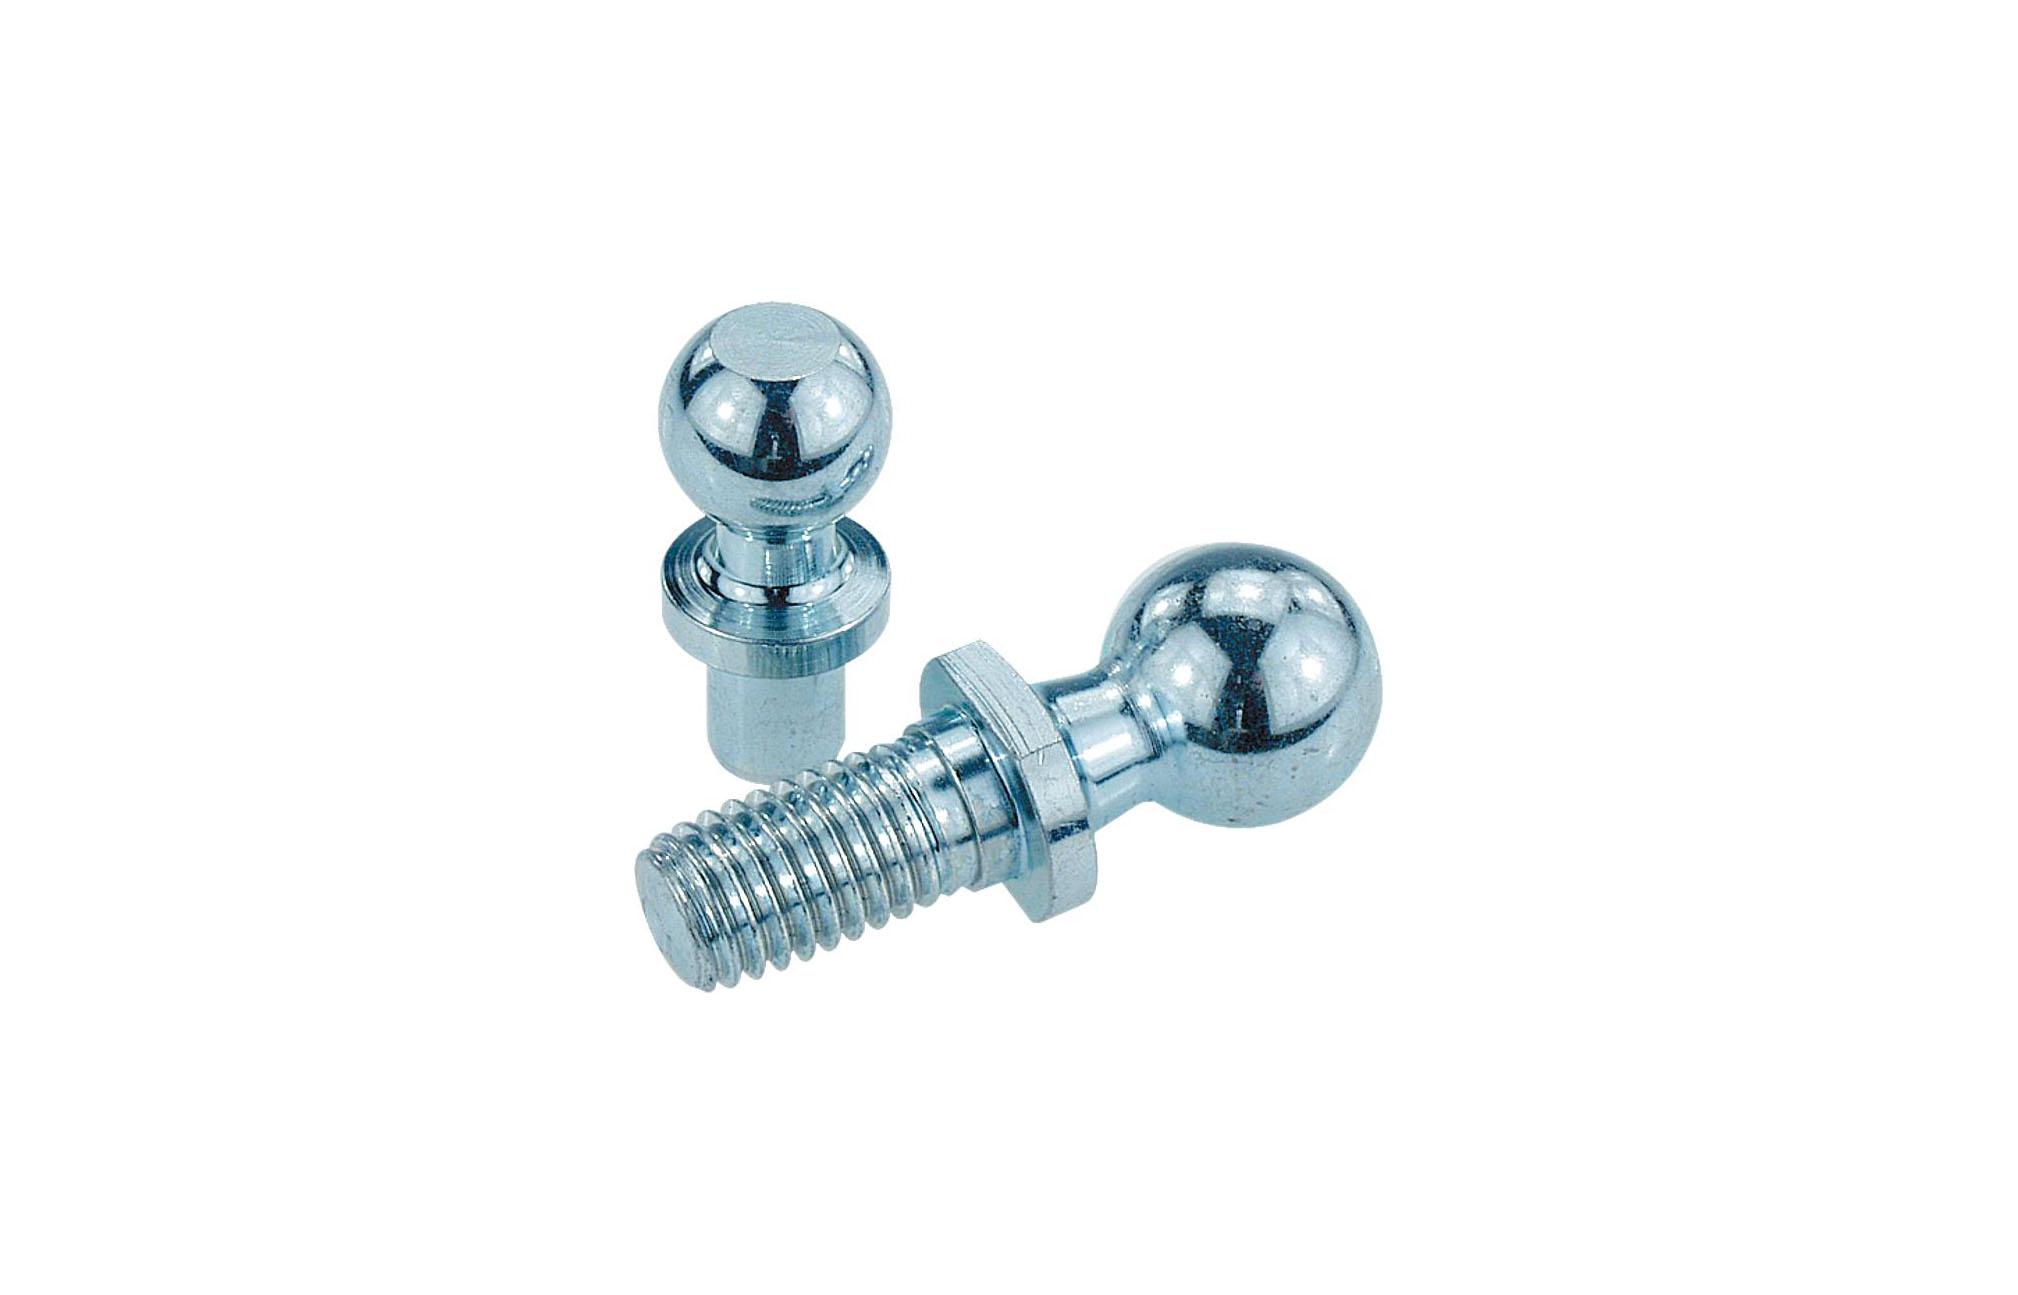 K0713 Ball studs for ball joints DIN 71803